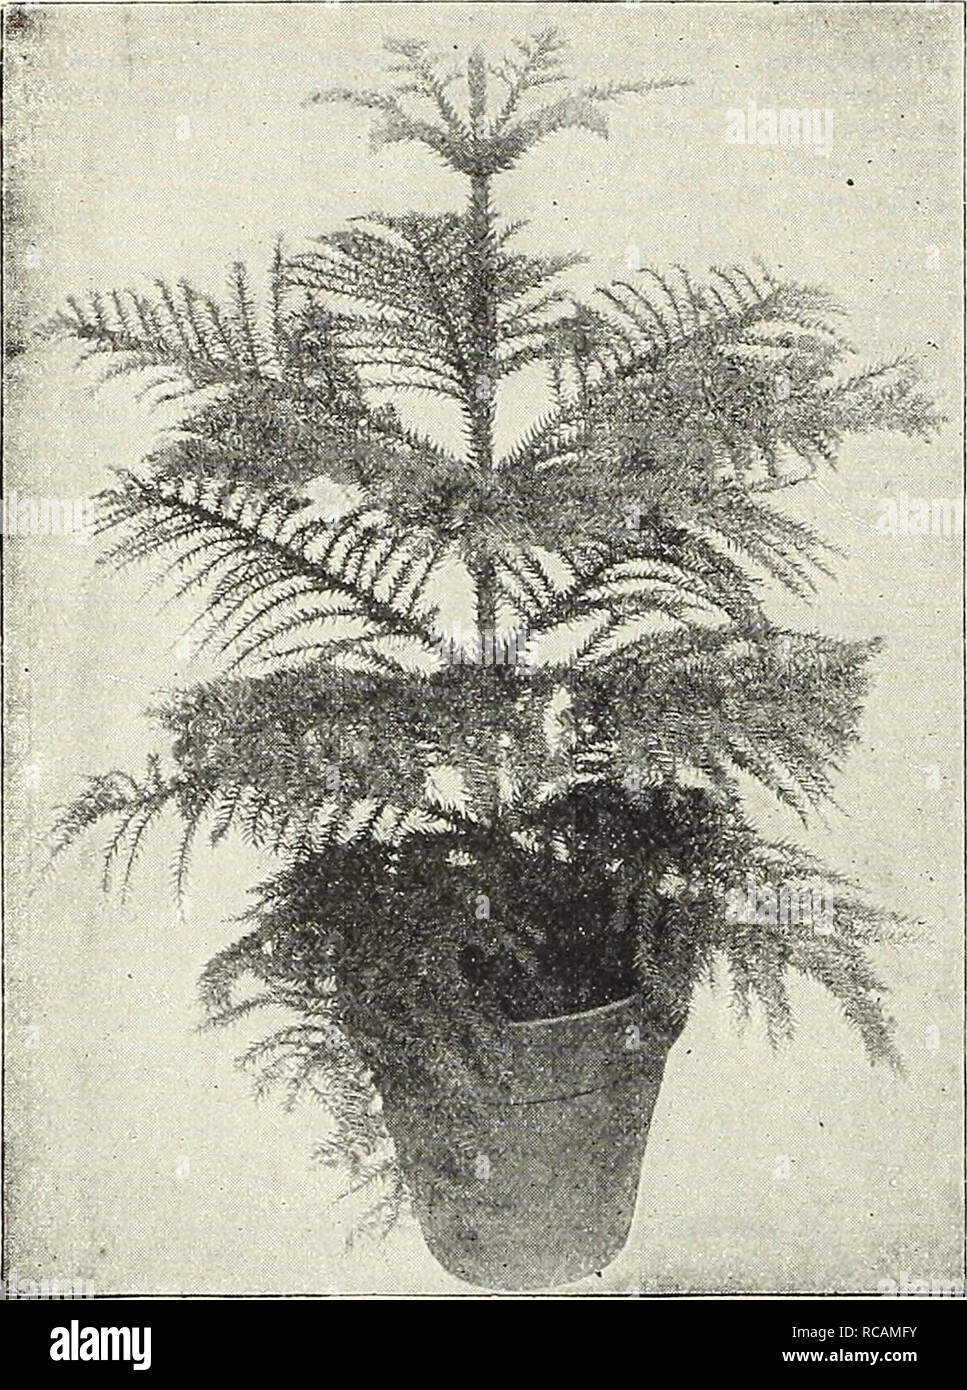 . Dreer's autumn catalogue 1931. Bulbs (Plants) Catalogs; Flowers Seeds Catalogs; Gardening Equipment and supplies Catalogs; Nurseries (Horticulture) Catalogs; Vegetables Seeds Catalogs. 22 pJEAjgjj .QARDENflw GREENHOUSE PLANTS 'fflLMtM. Araucaria Excelsa Ardisia Crenulata. A very ornamental greenhouse plant with dark green, glossy, attractive foliage, bearing clusters of very brilliant red berries. A good subject for the window garden. Fine plants in 5-inch pots that will fruit this season. $2.00 each. Asparagus Plumosus Nanus (Asparagus Fern). There is no better plant for table decoration th Stock Photo